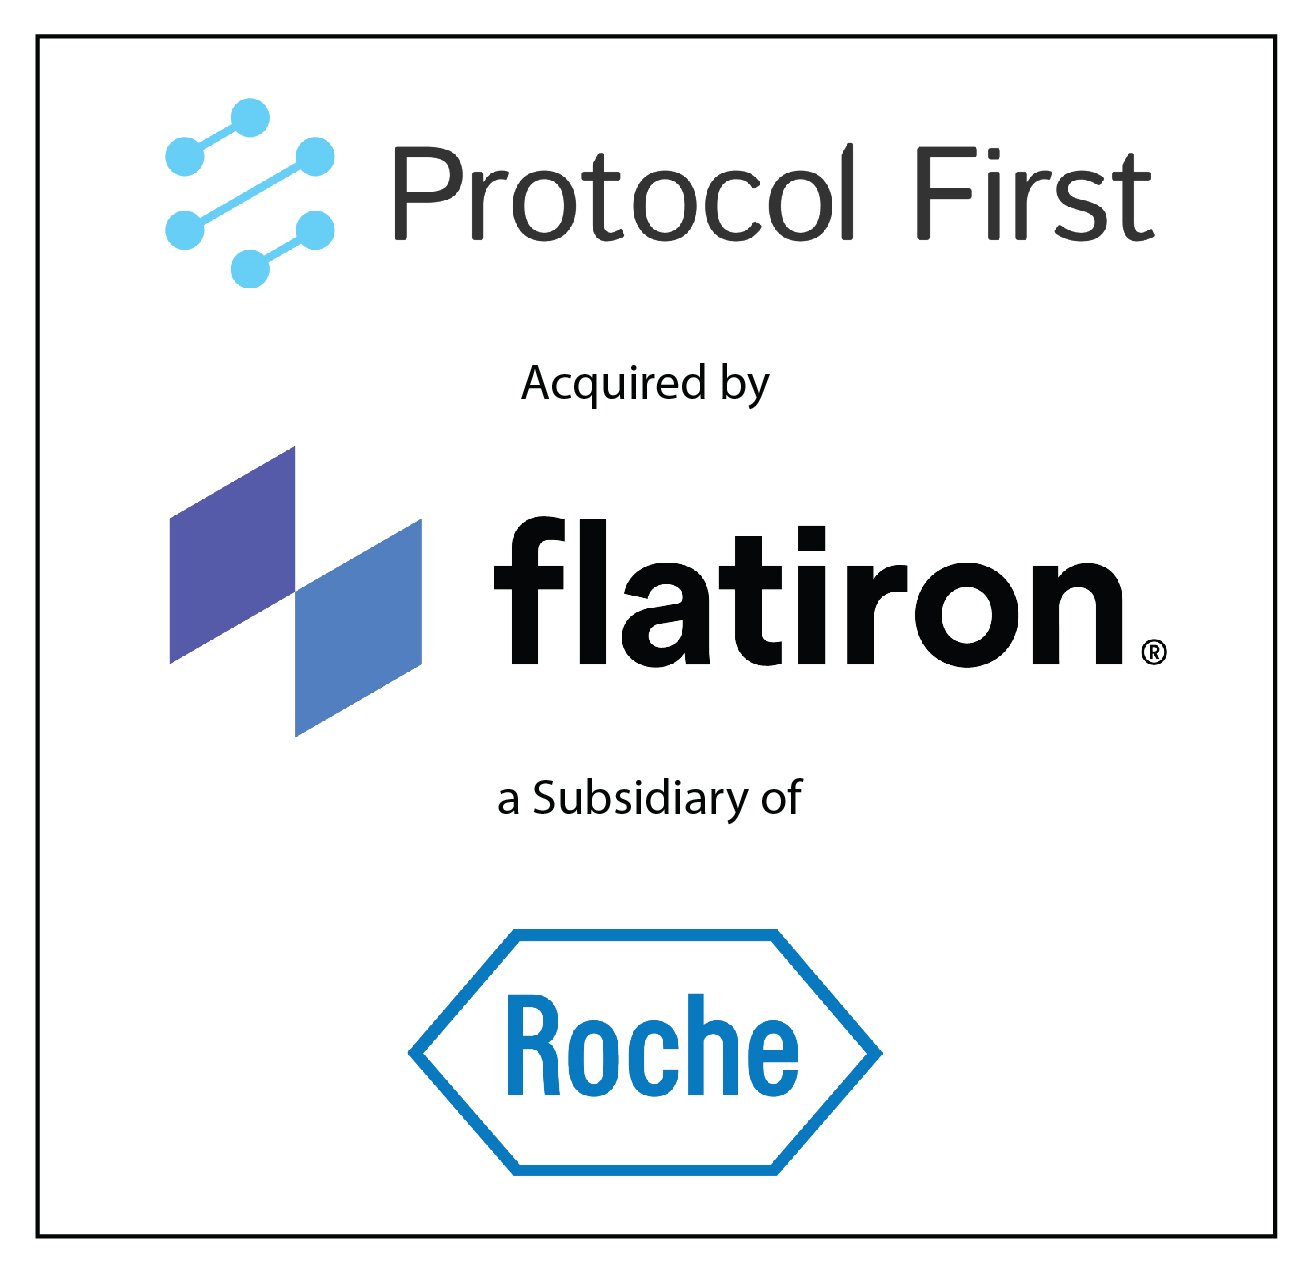 Protocol First Joins Flatiron Health® to Help Bridge the Gap Between Real-World Care and Clinical Research